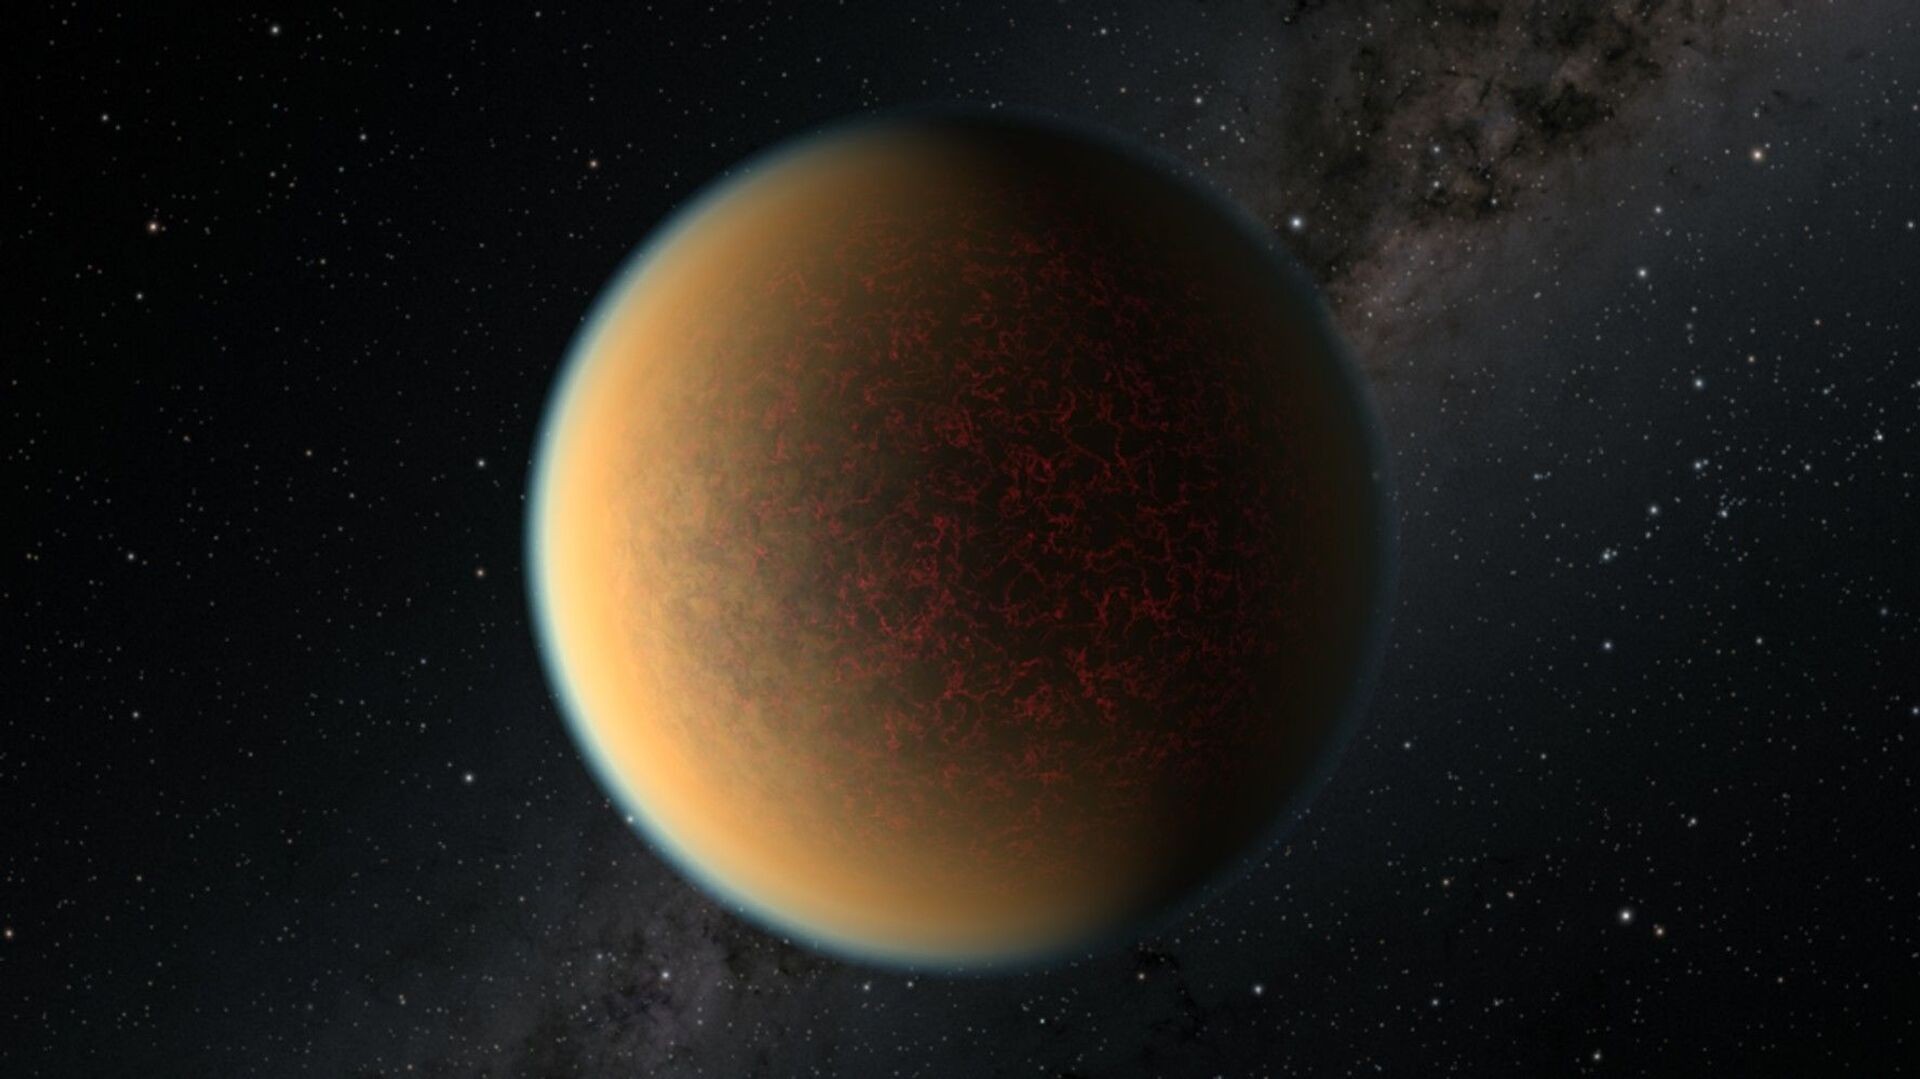 This is an artist's impression of the Earth-sized, rocky exoplanet GJ 1132 b, located 41 light-years away around a red dwarf star. Scientists using NASA's Hubble Space Telescope have found evidence this planet may have lost its original atmosphere but gained a second one that contains a toxic mix of hydrogen, methane and hydrogen cyanide. - Sputnik International, 1920, 07.09.2021